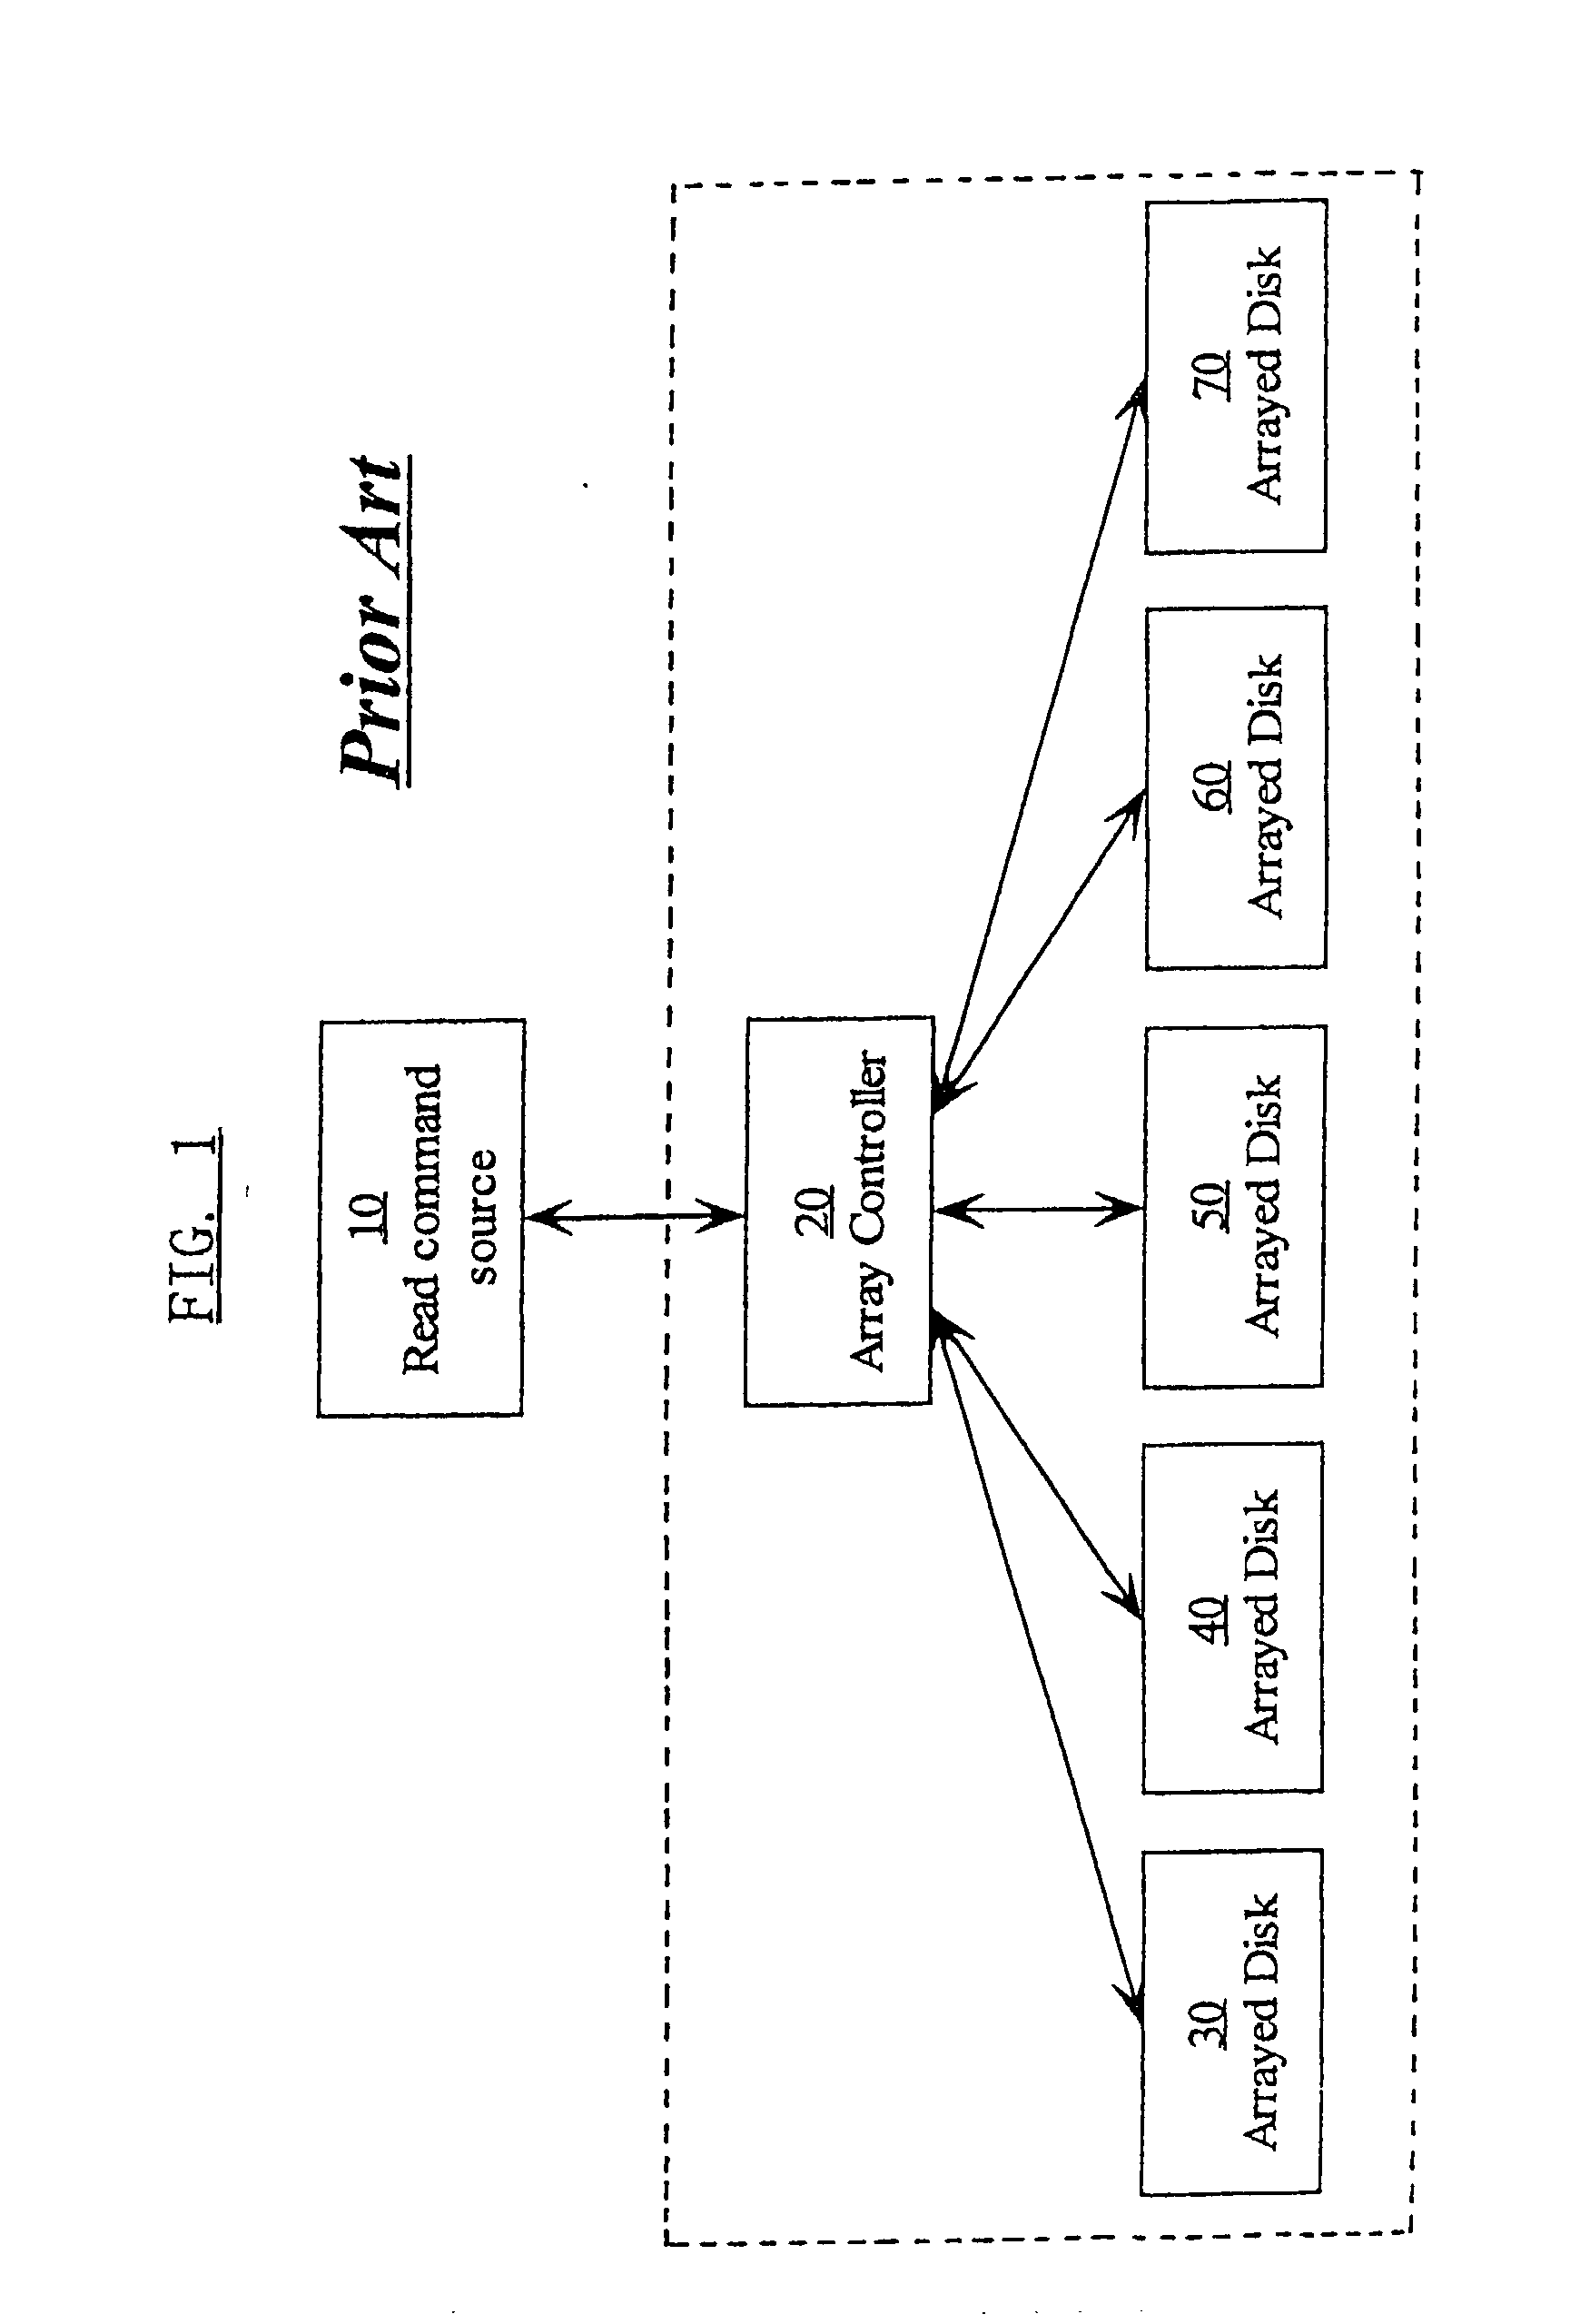 Data storage array method and system